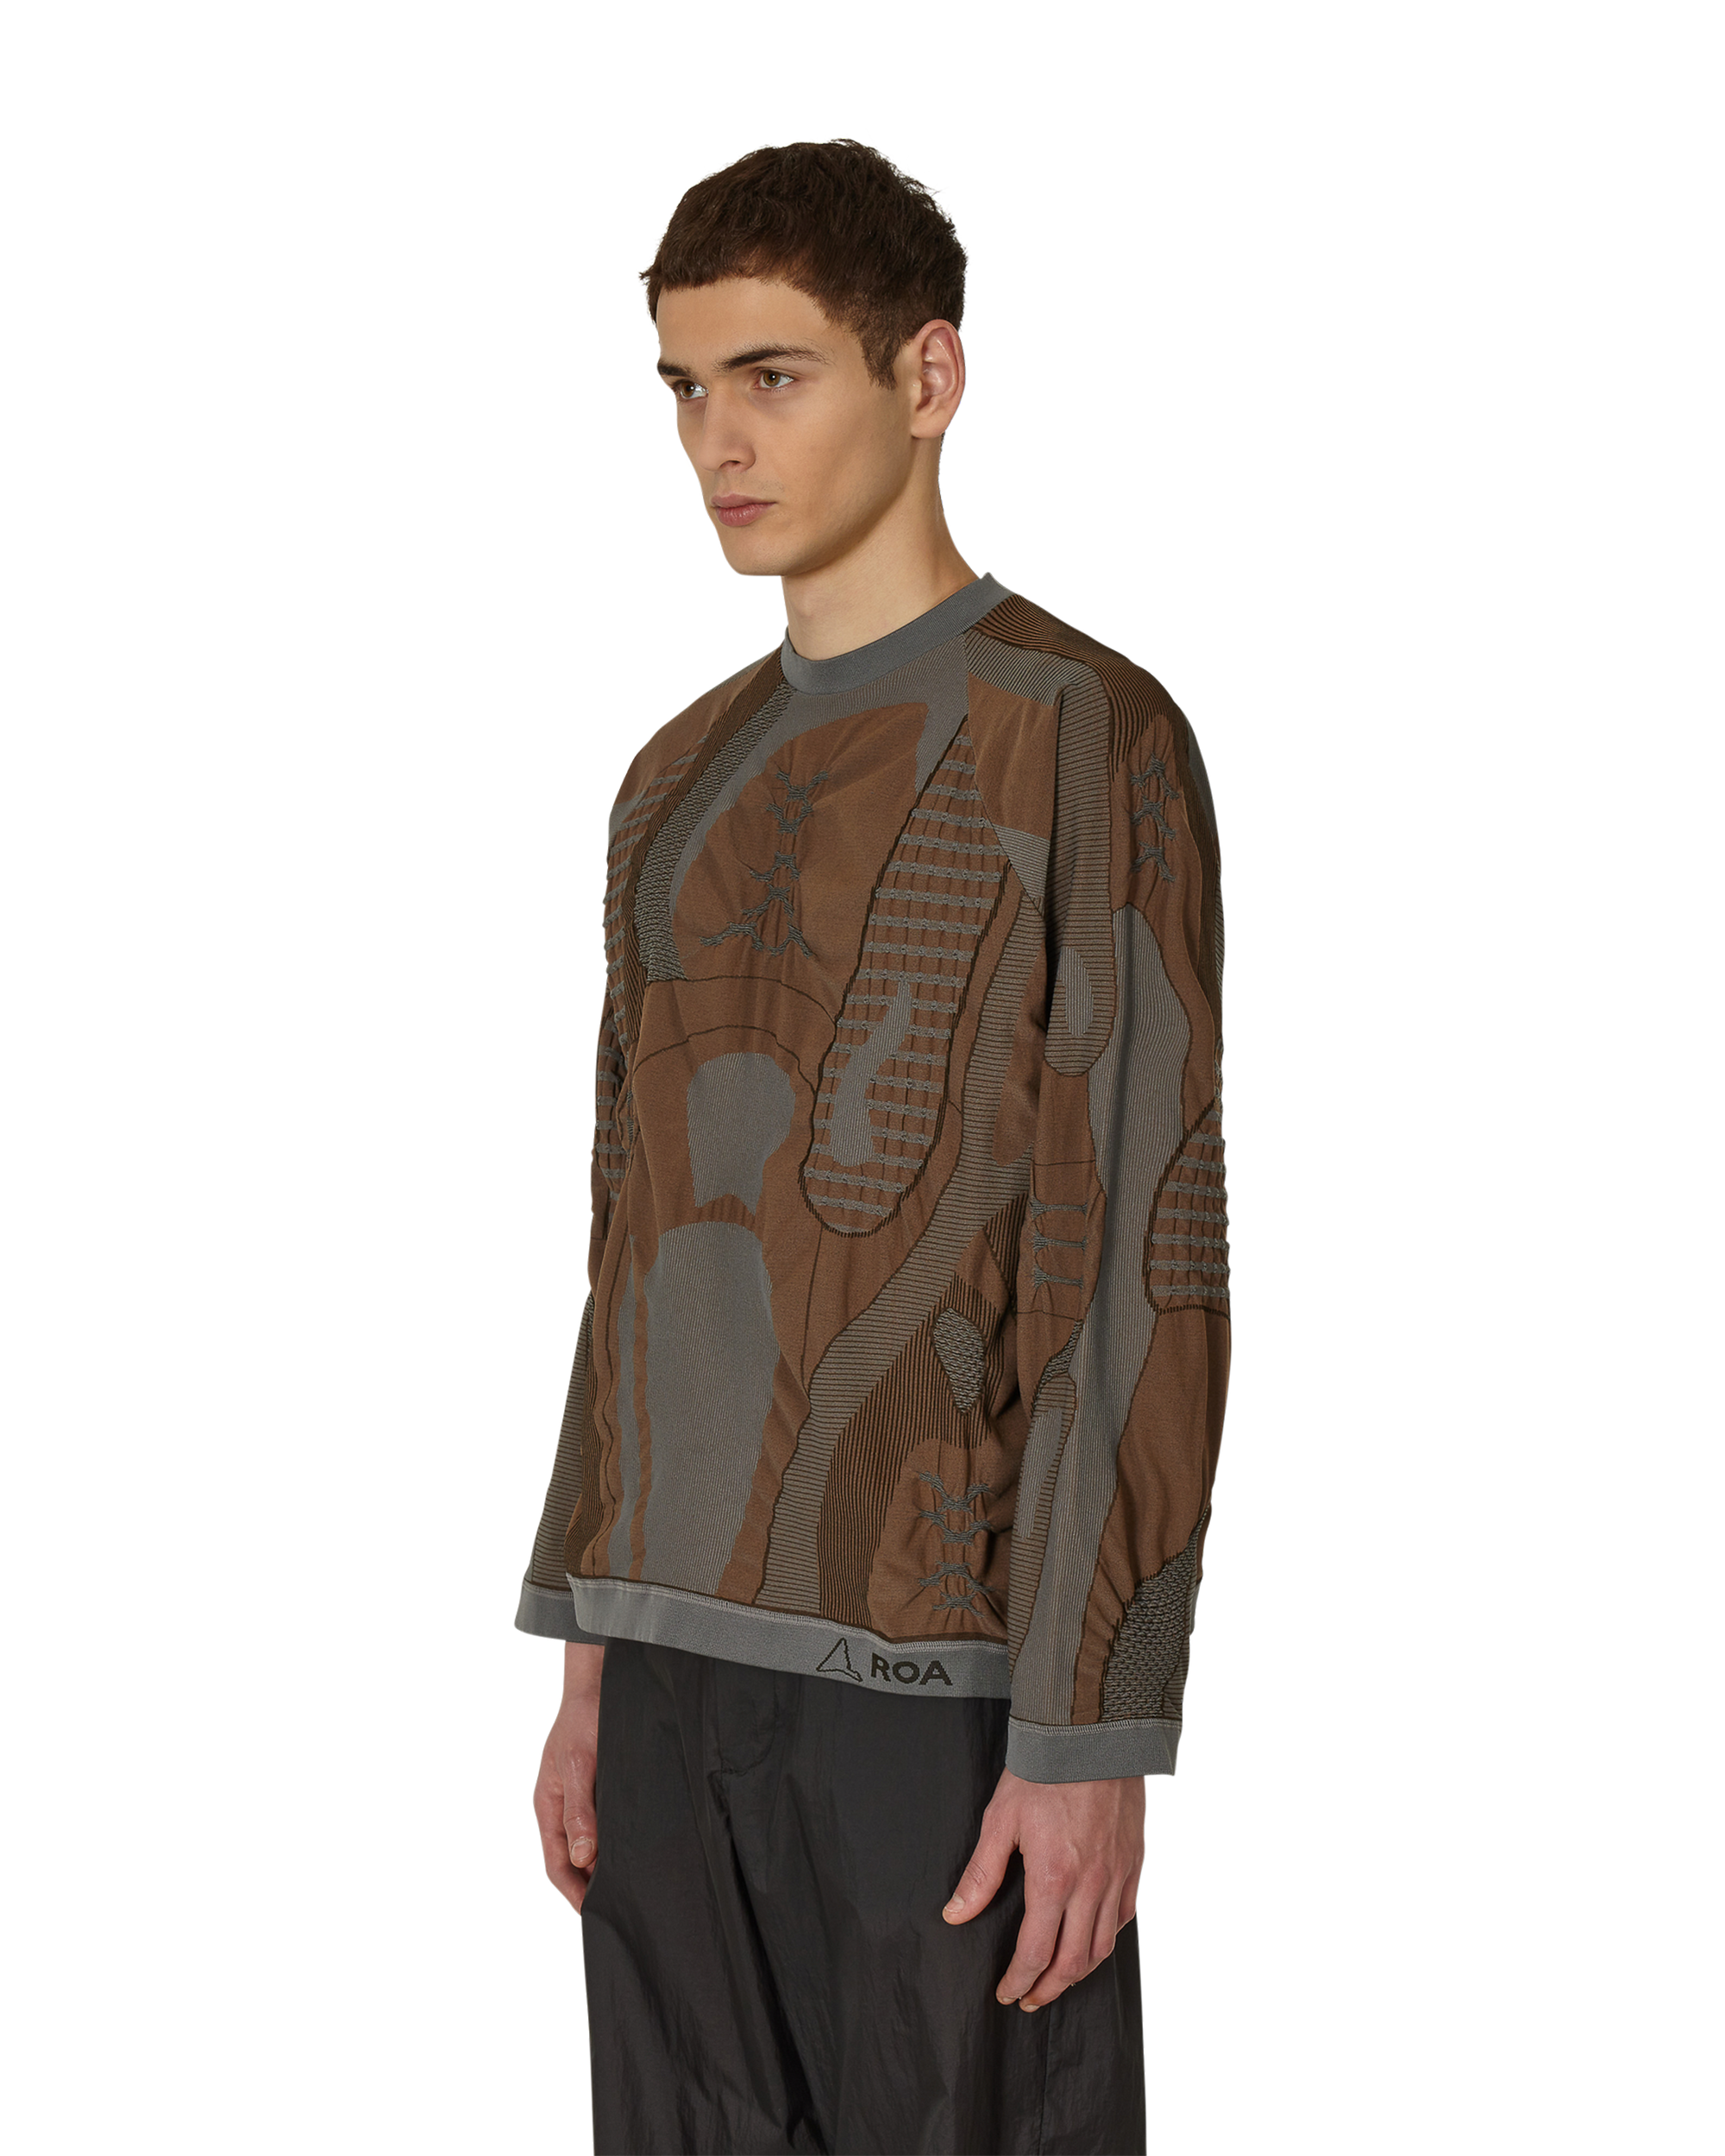 Oversize 3D Knit - Brown / Grey